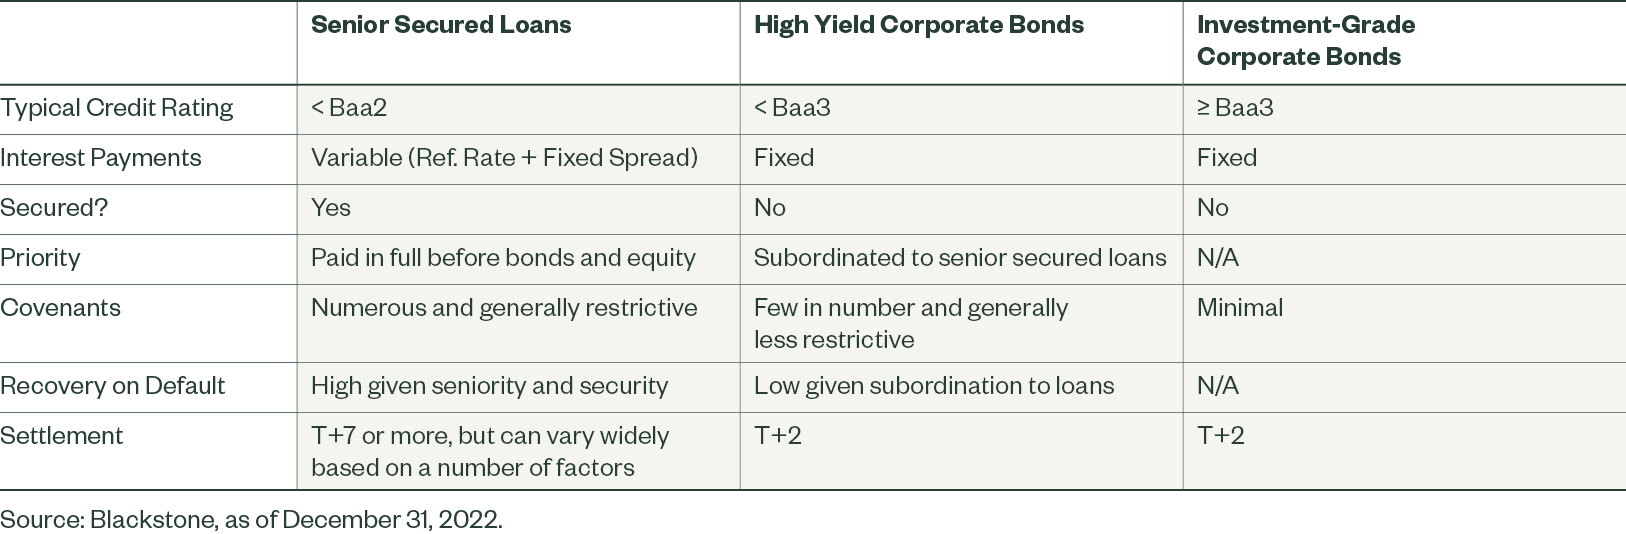 Senior Loans Versus High Yield and Investment-Grade Bones at a Glance